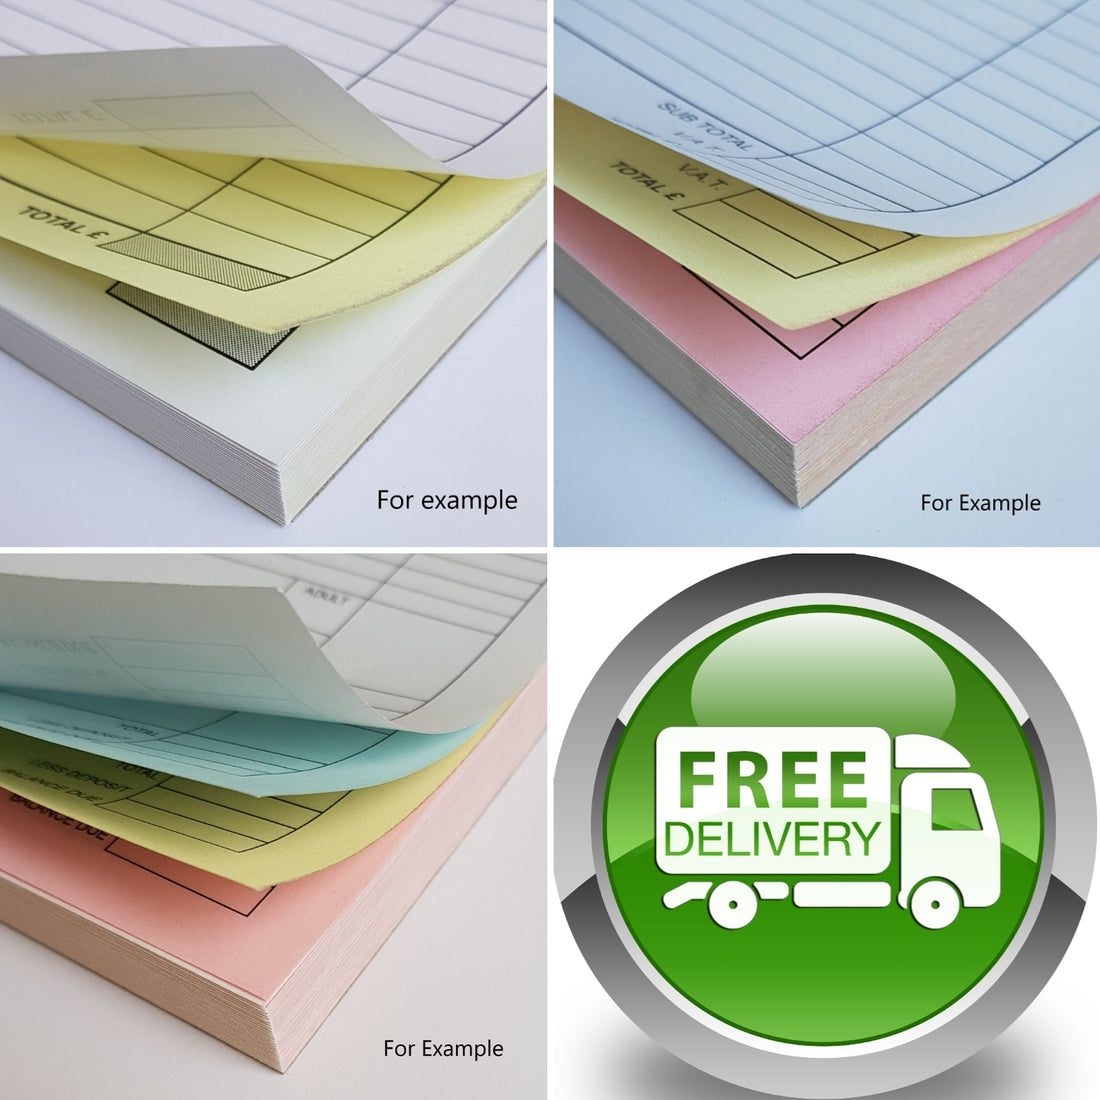 Personalised NCR Pads, NCR Books, NCR Sets | Carbon Copy Forms etc.